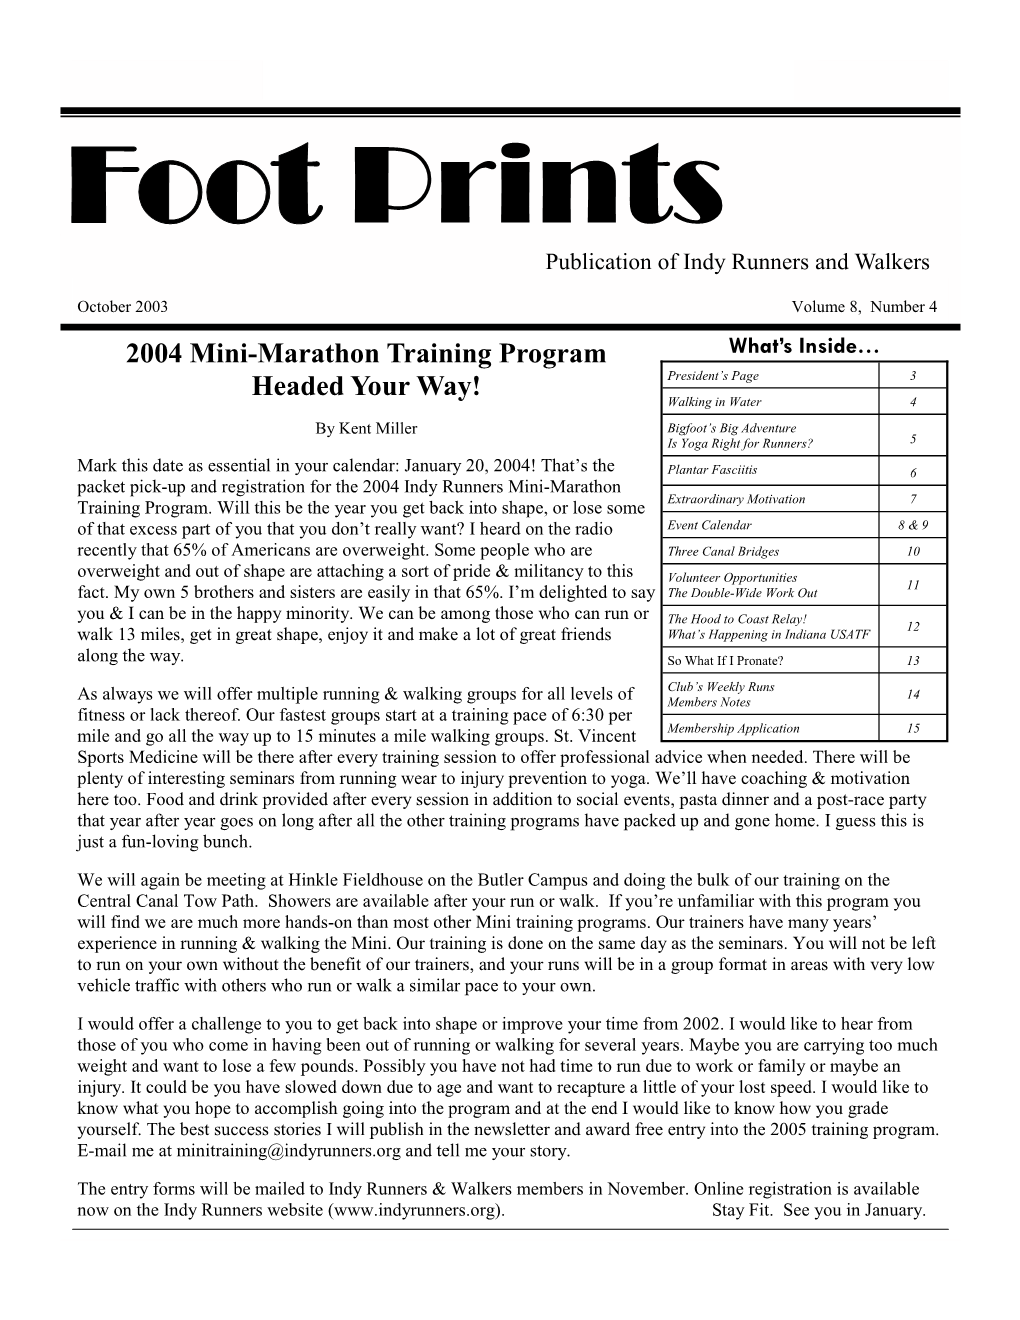 Foot Prints Page 1 Foot Prints Publication of Indy Runners and Walkers